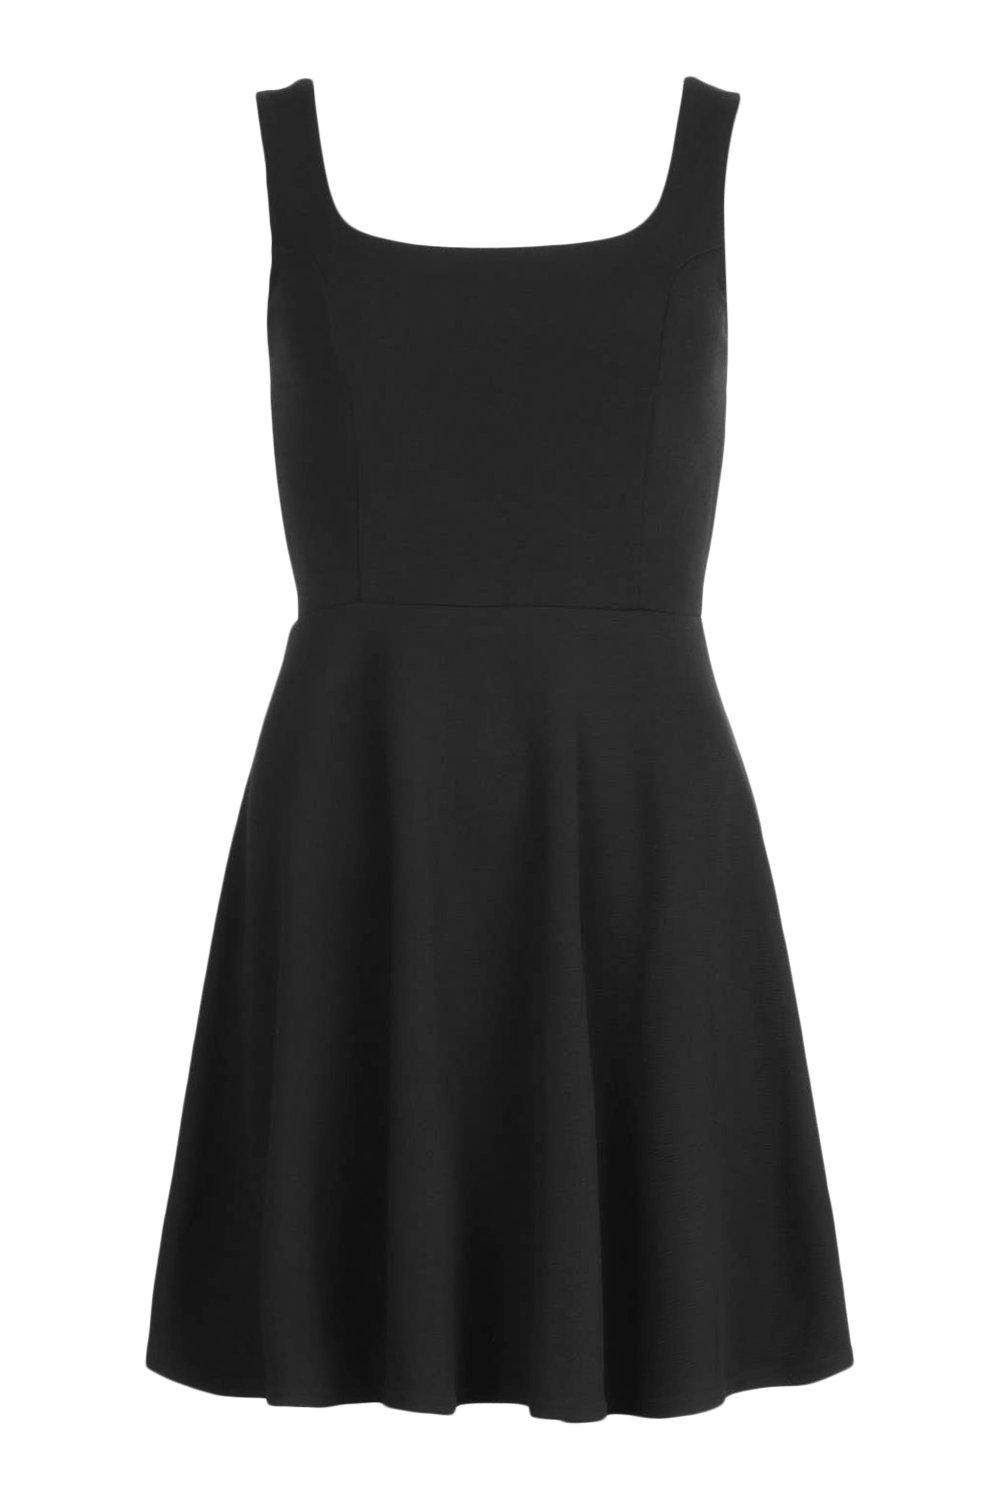 NEW LADIES WOMENS BOOHOO WIDE STRAP SWEETHEART SKATER DRESS SIZE 8-14